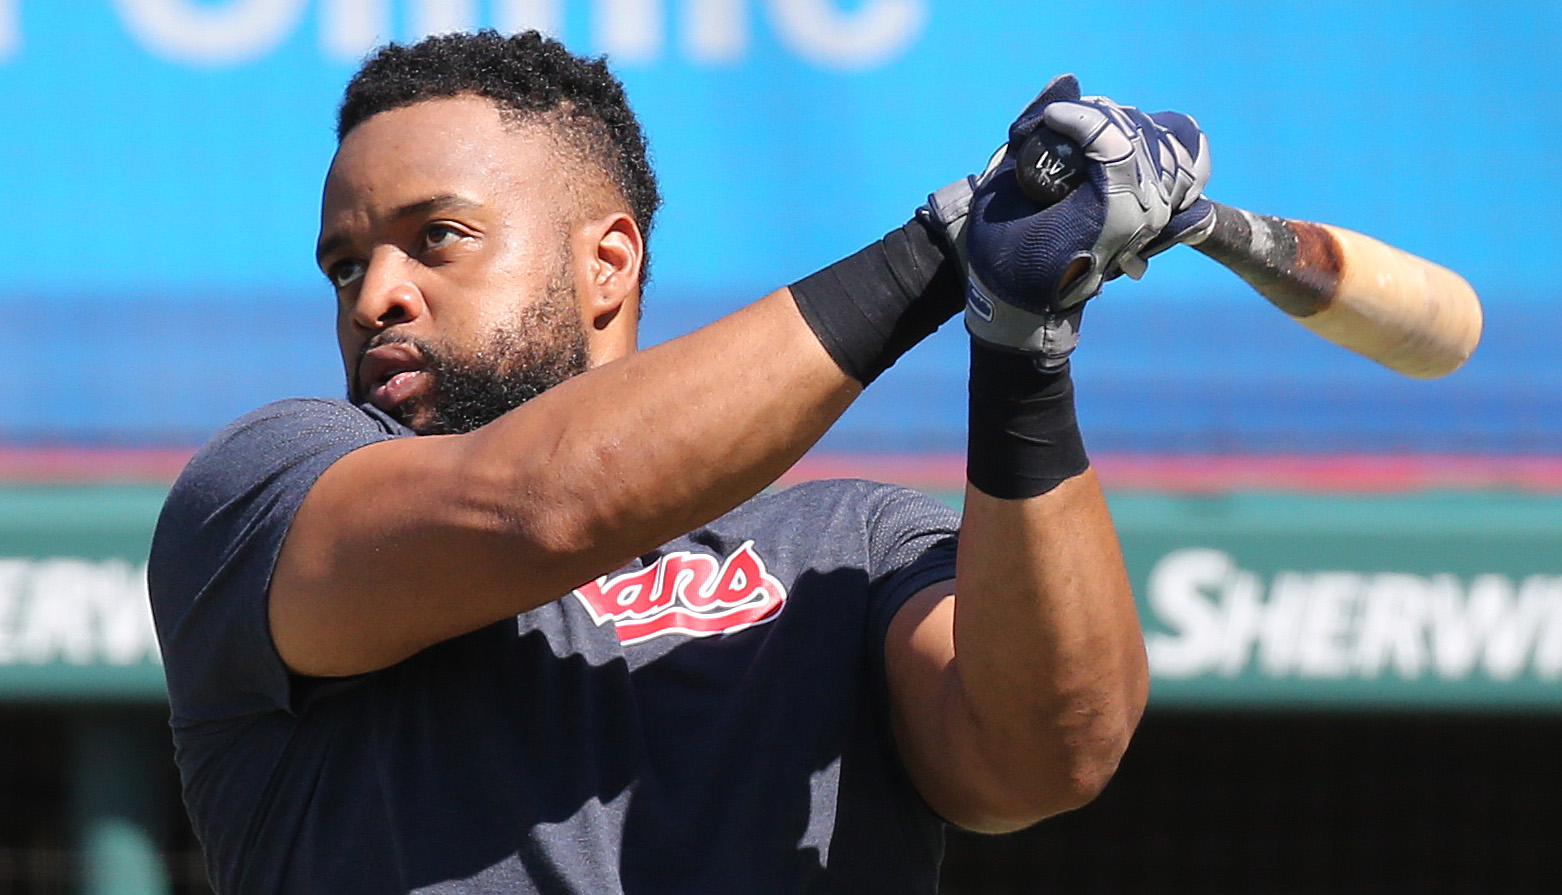 Carlos Santana scratched from Cleveland Indians lineup with left